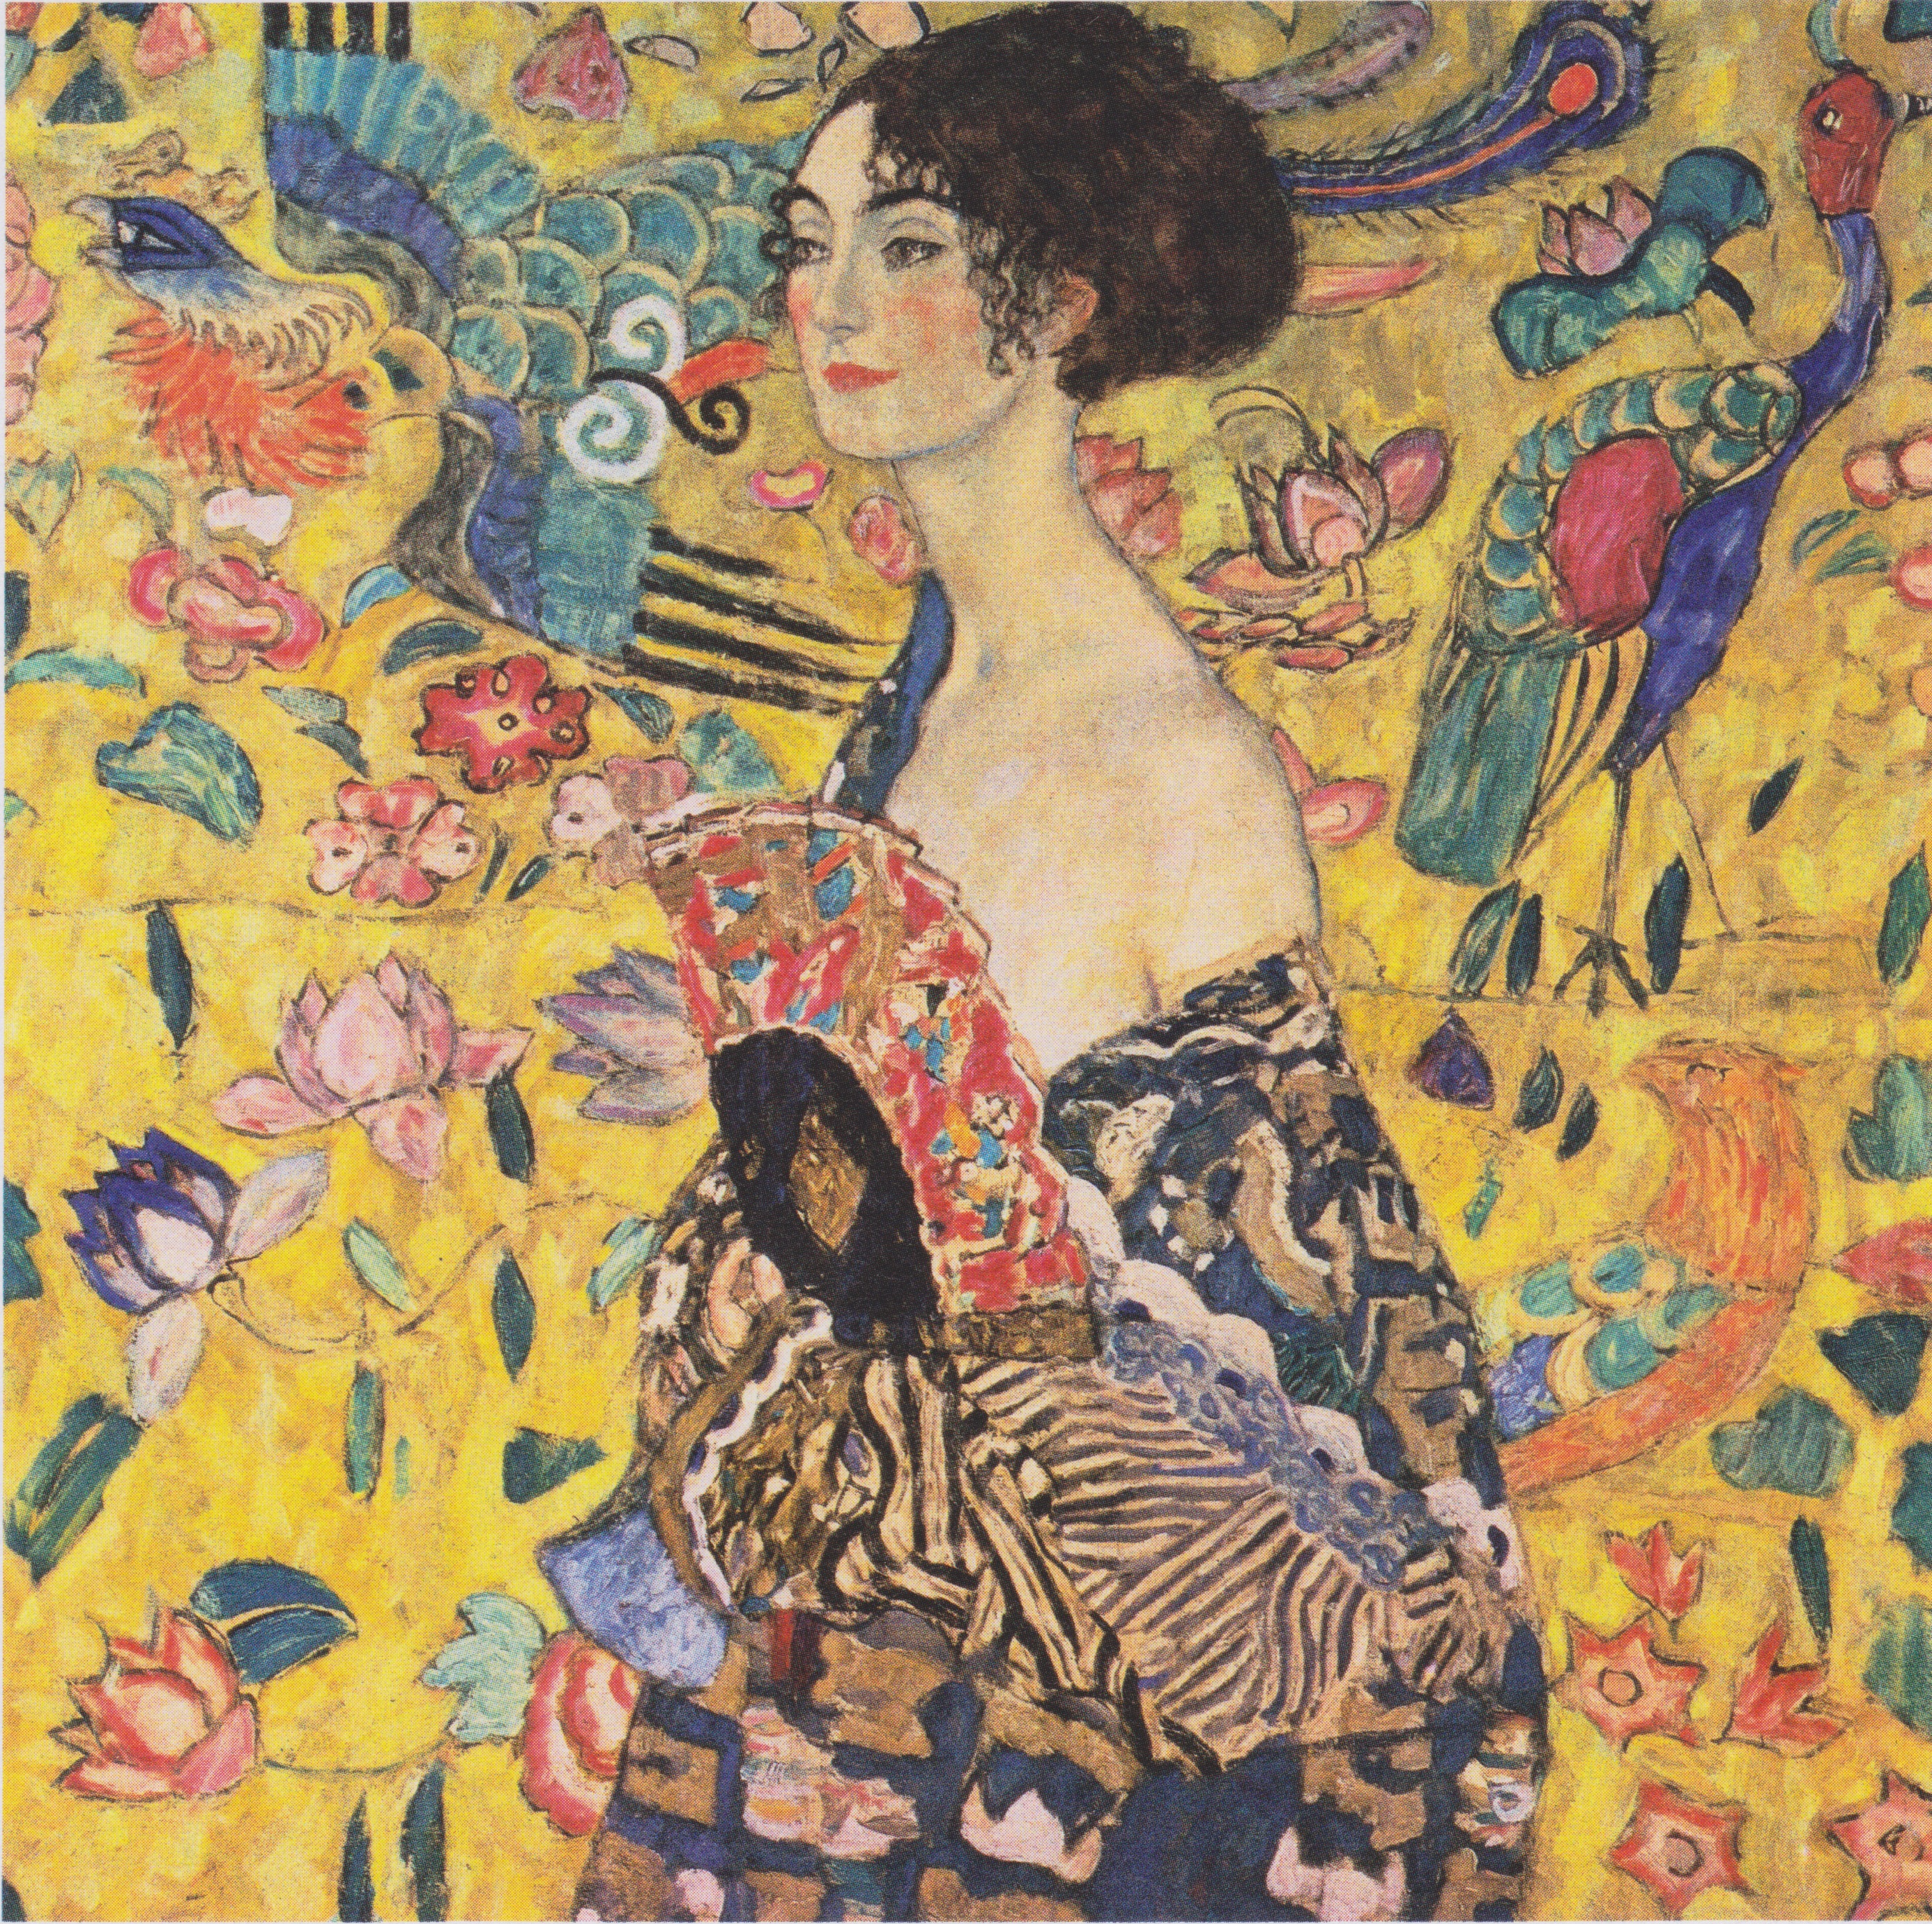 Lady with Fan by Gustav Klimt - 1918 - 100 x 100 cm private collection